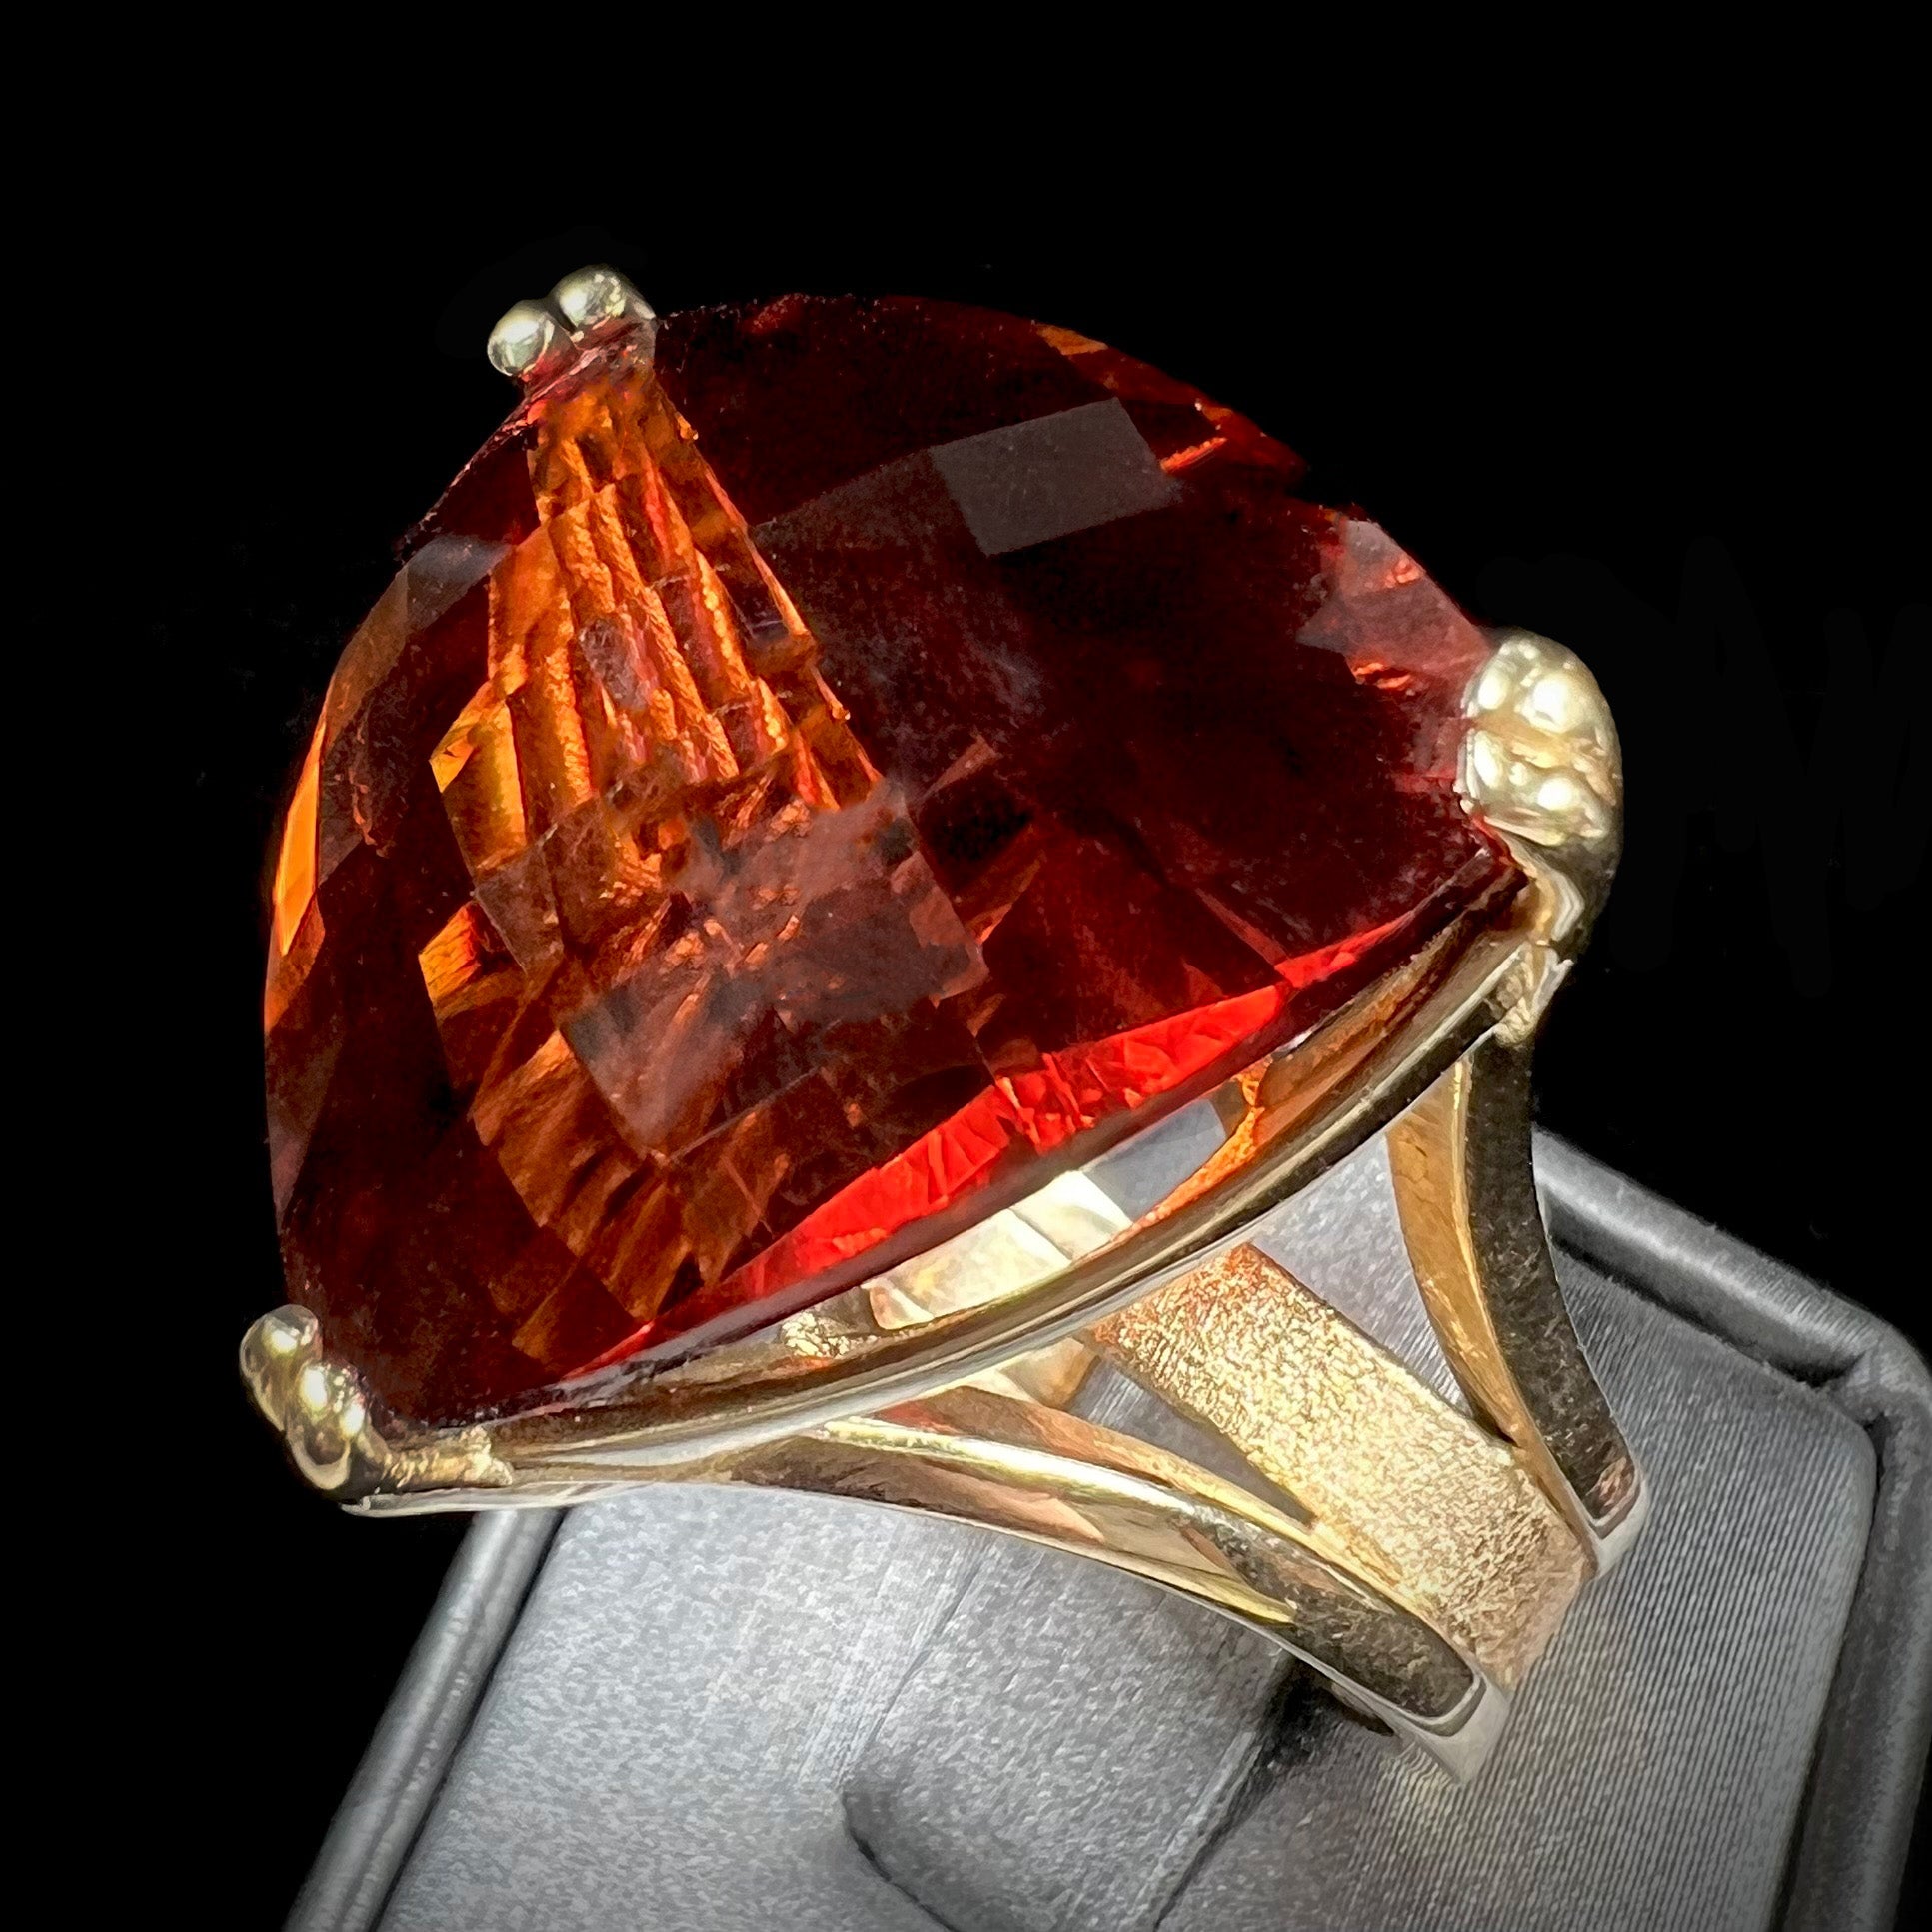 A ladies' trillion cut madeira citrine cocktail ring handmade in yellow gold.